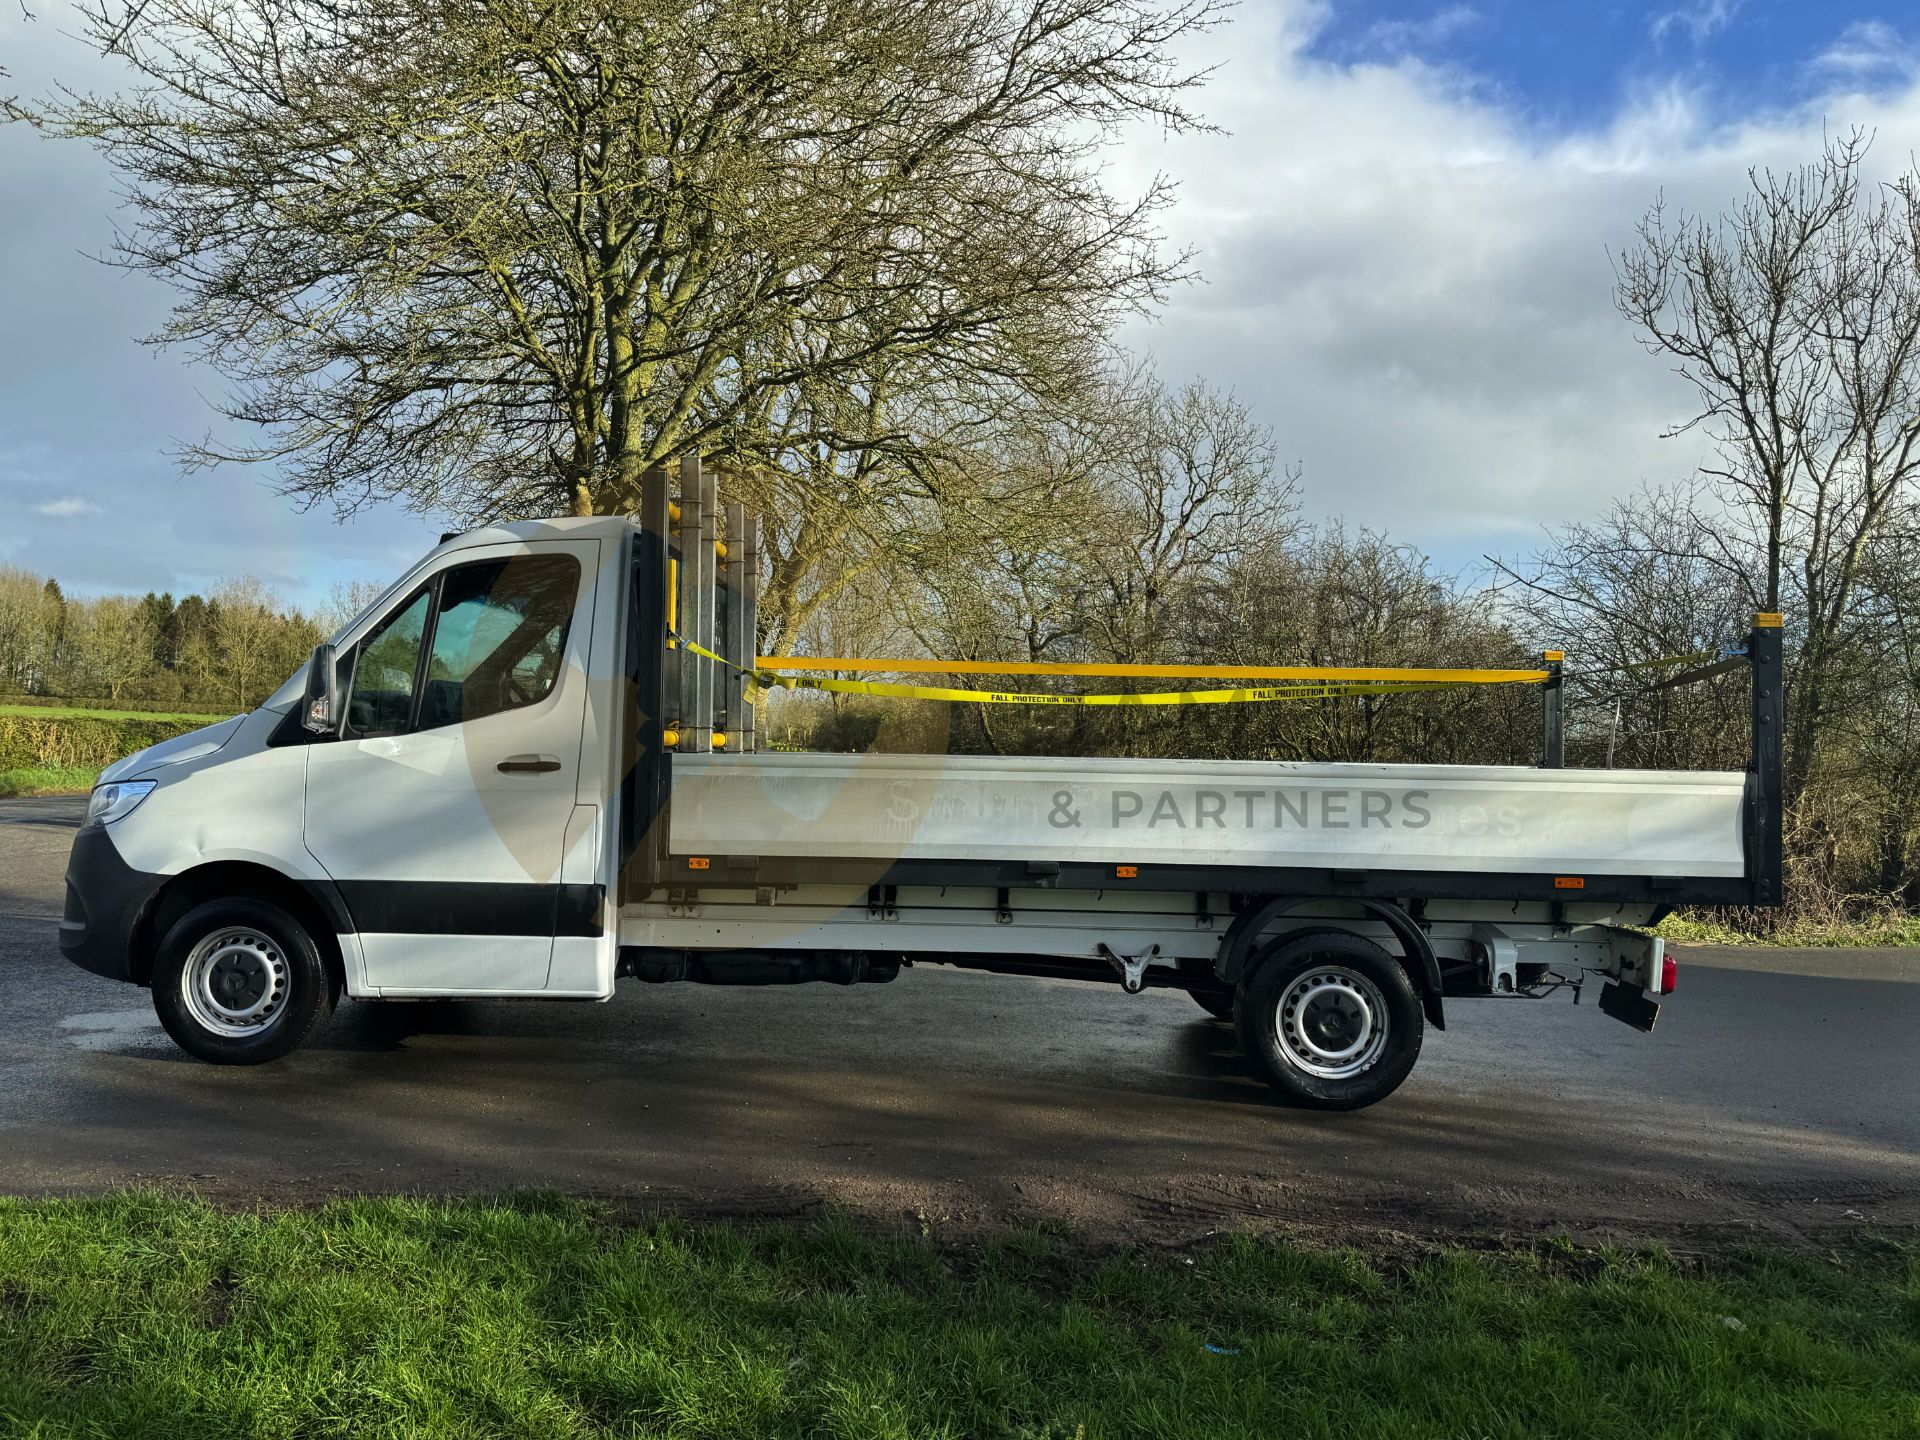 (ON SALE) MERCEDES SPRINTER 314 CDI *LWB - DROPSIDE TRUCK* (2020 -NEW MODEL) 7-G AUTOMATIC *EURO 6* - Image 8 of 36